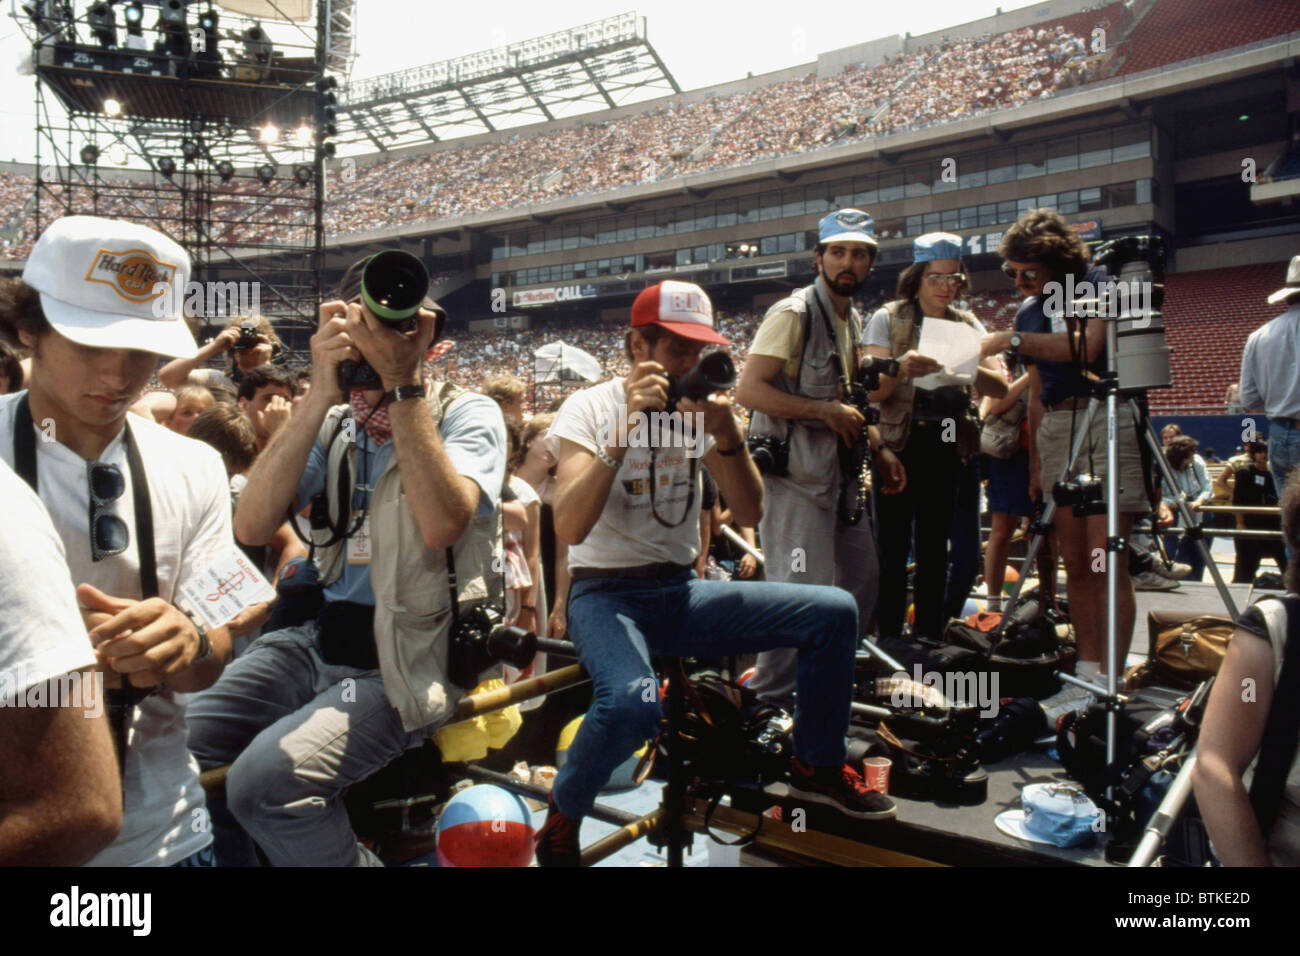 Photographers preparing to work at the concert for  Amnesty International, Giant Stadium, New Jersey, June 15, 1986, Stock Photo